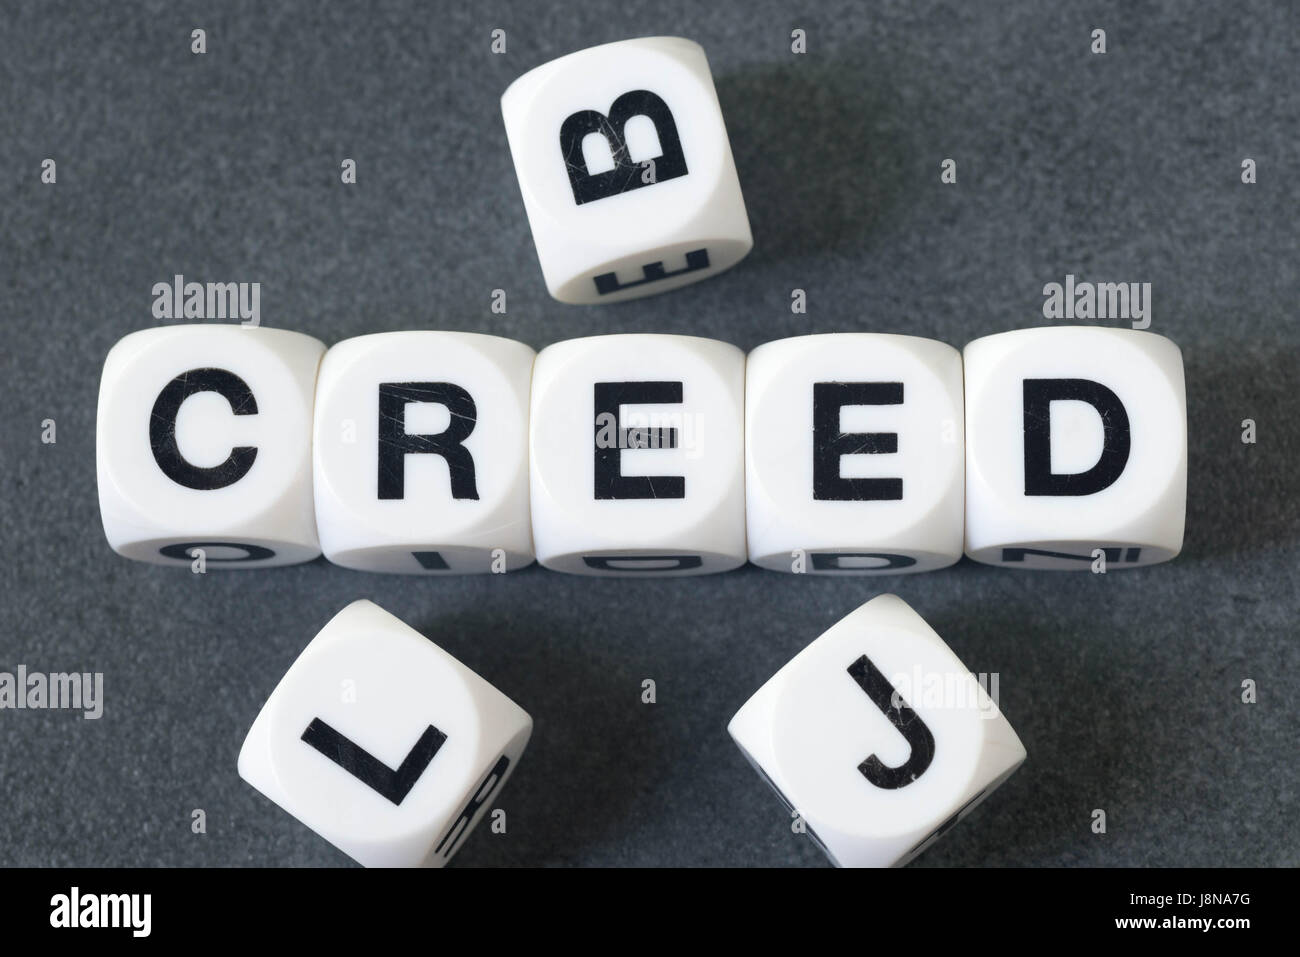 word creed on white toy cubes Stock Photo